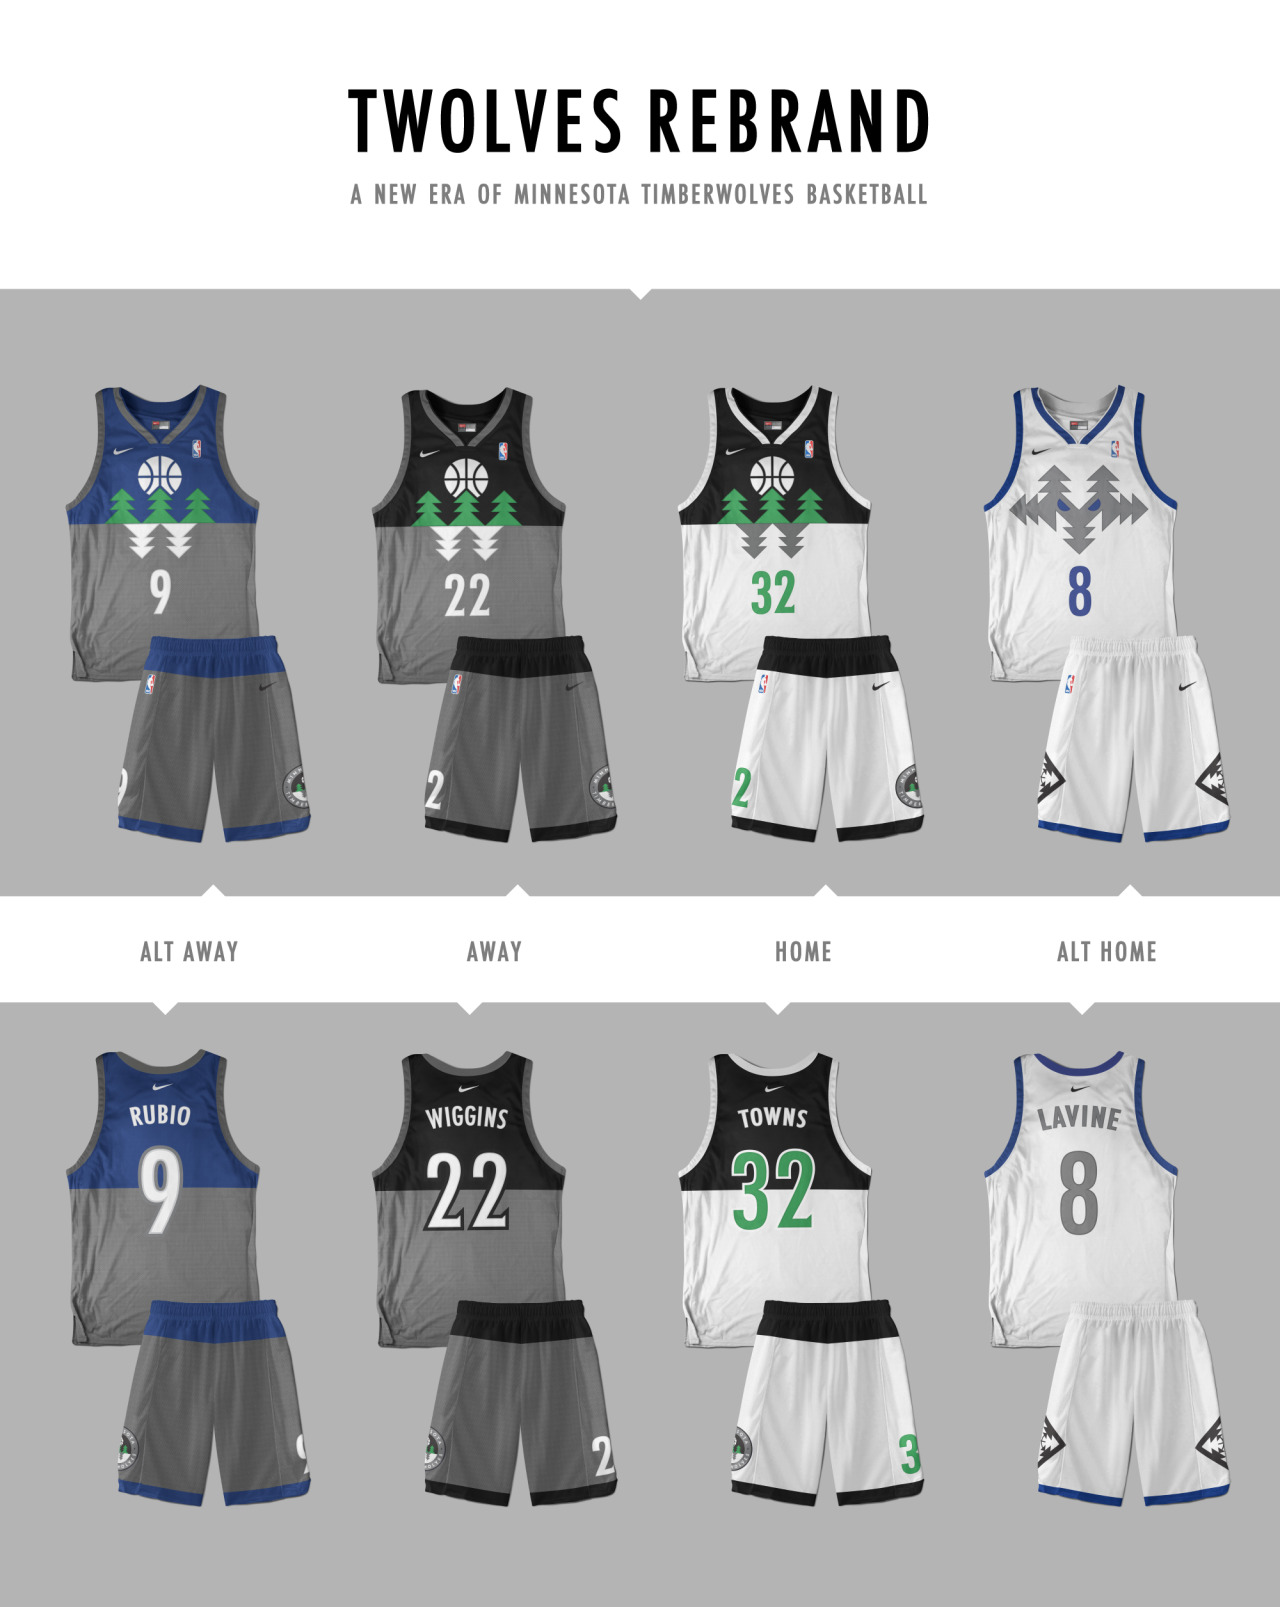 Chris Creamer  SportsLogos.Net on X: The Minnesota Timberwolves going  back to the blue and green look of their expansion season with the late 90s  wordmark, numbering and tree trim. A nod